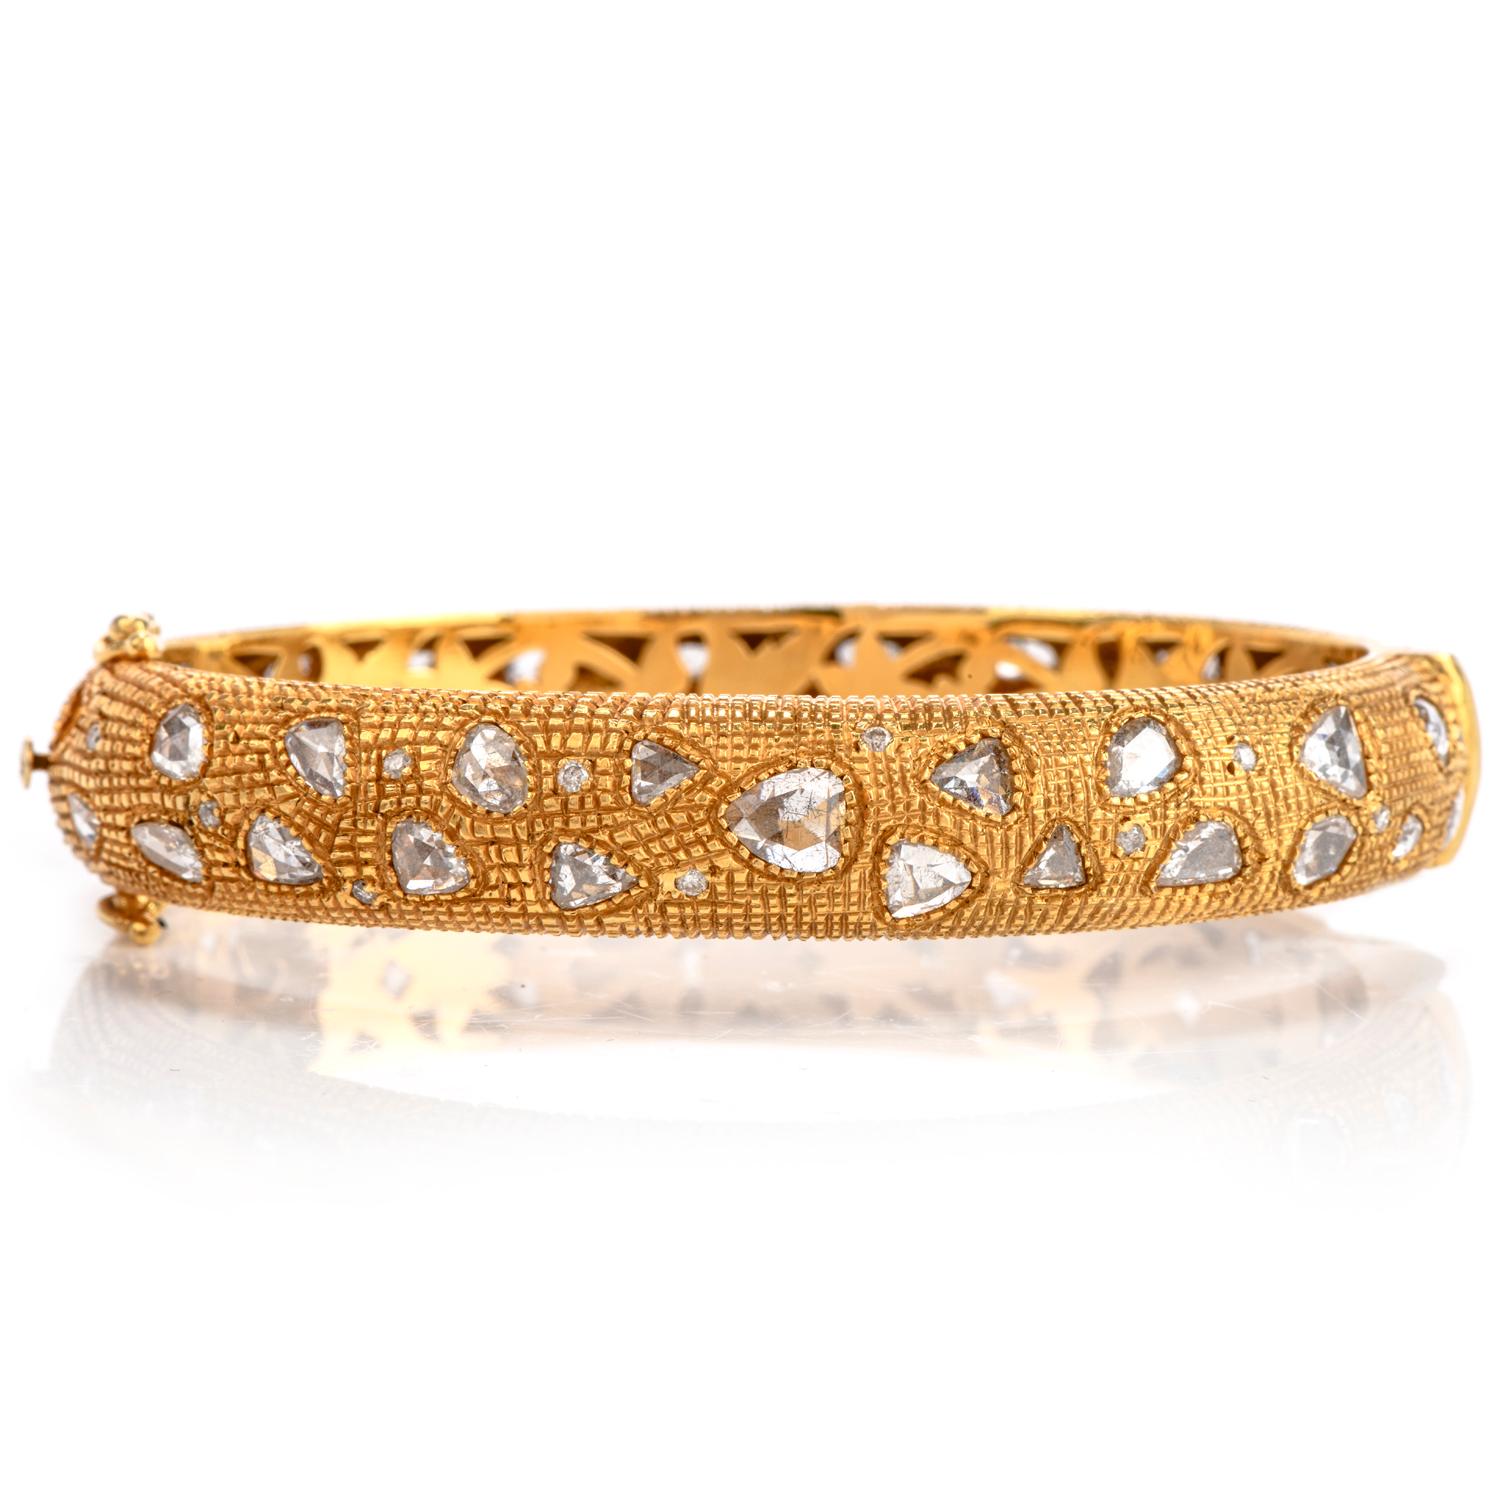 Estate 18K Diamond with textured 18k gold Bangle Bracelet in 35.2 grams of 18K yellow gold. Set symmetrically with approx. 40 large rose-cut dimaond and 25 round cut diamonds beded indide the gold bangle. 

Diamonds weigh approx. 6.63 carats. The